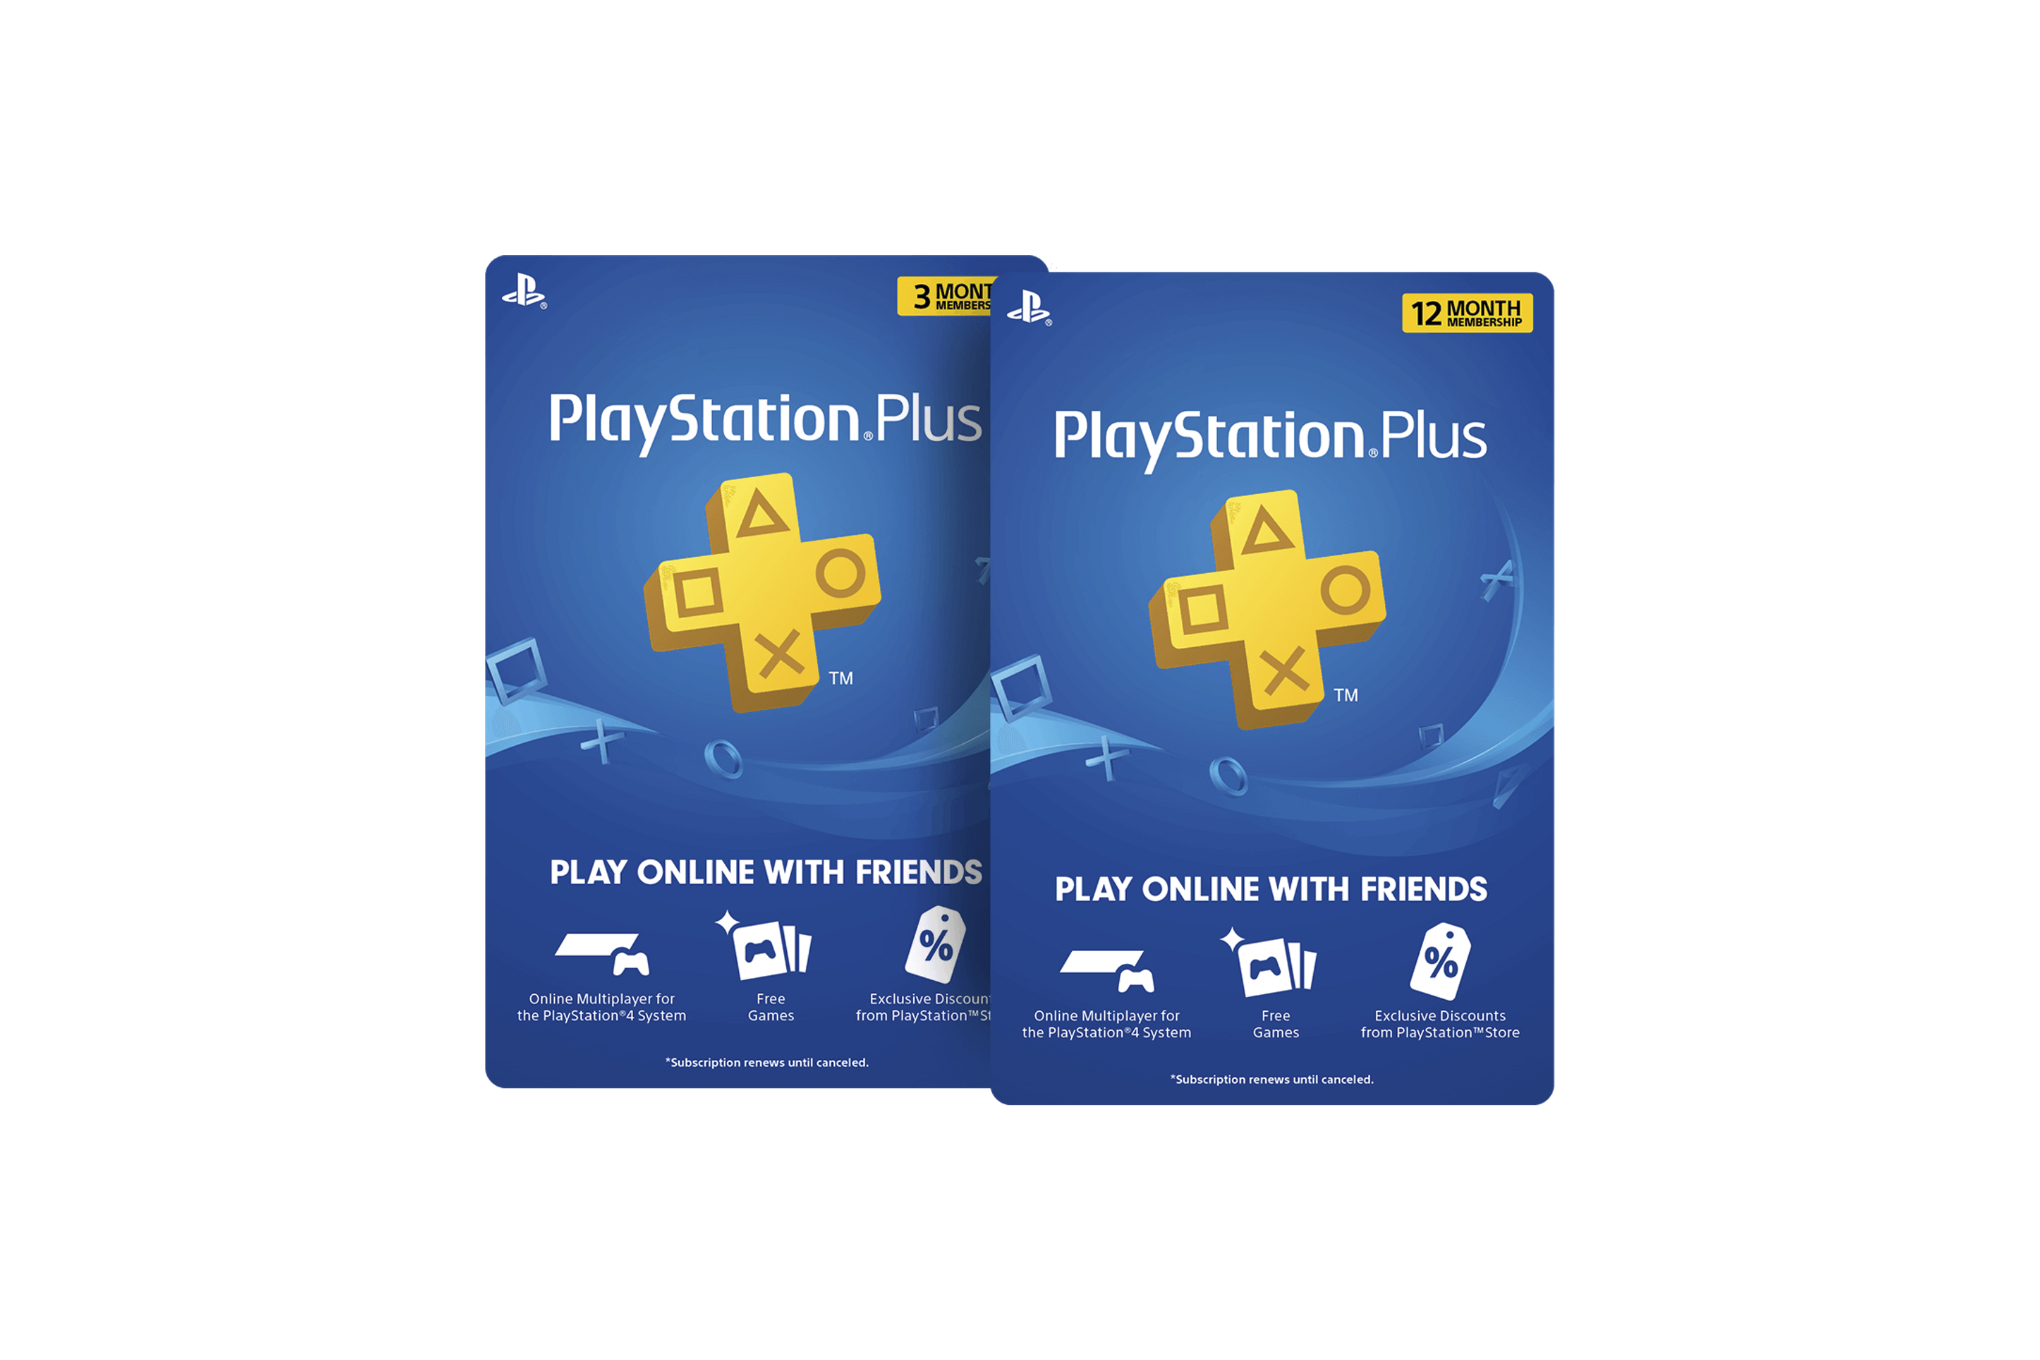 novato Fracaso desastre Grab a full year of PlayStation Plus for only $27 - The Verge